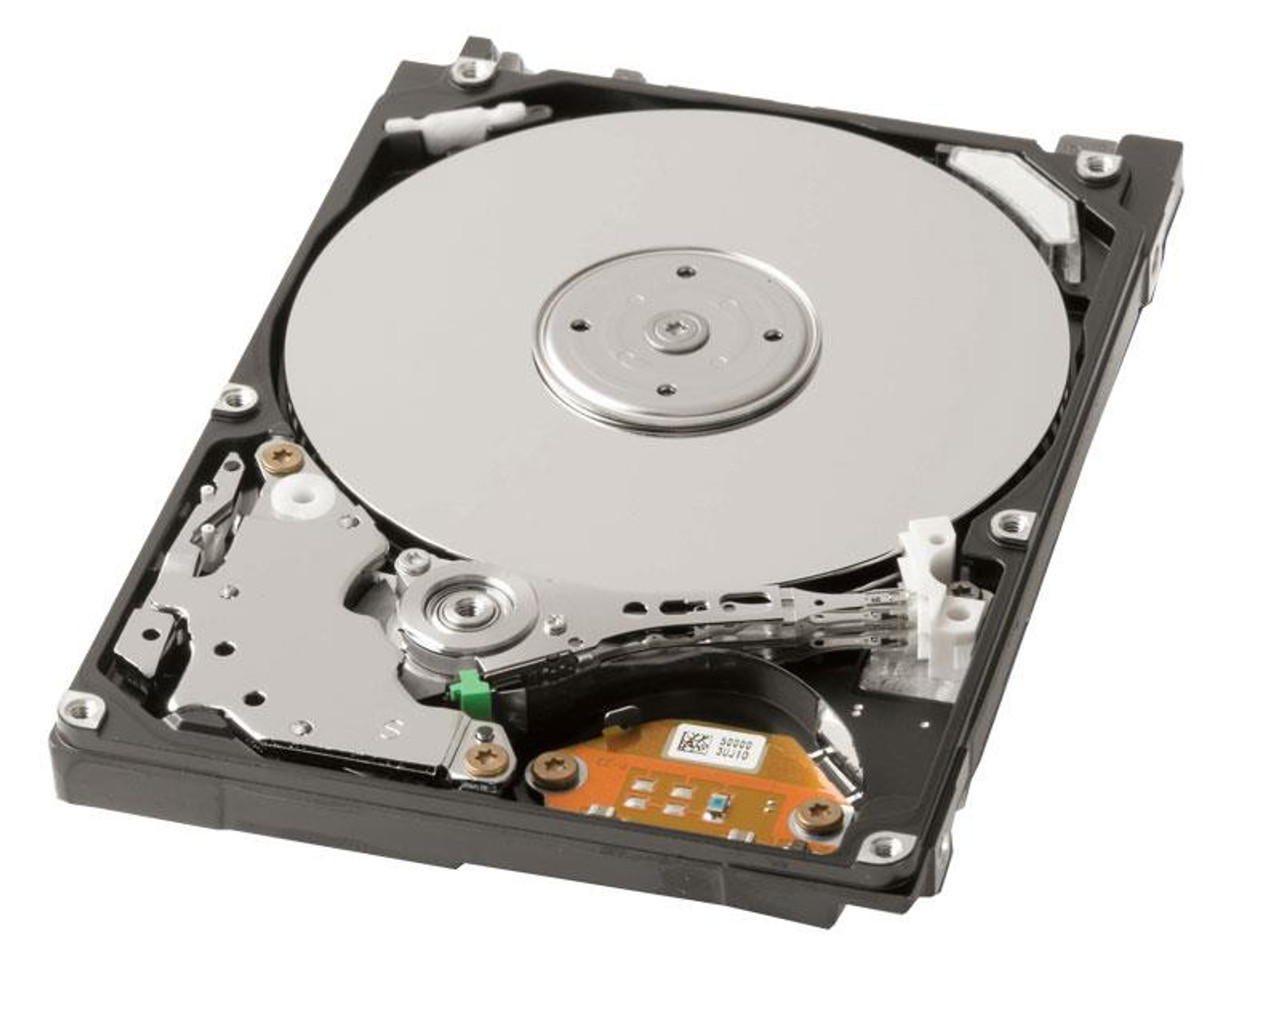 OU3990 Dell 73GB 15000RPM Ultra-320 SCSI 80-Pin Hot Swap 8MB Cache 3.5-inch Internal Hard Drive with Tray